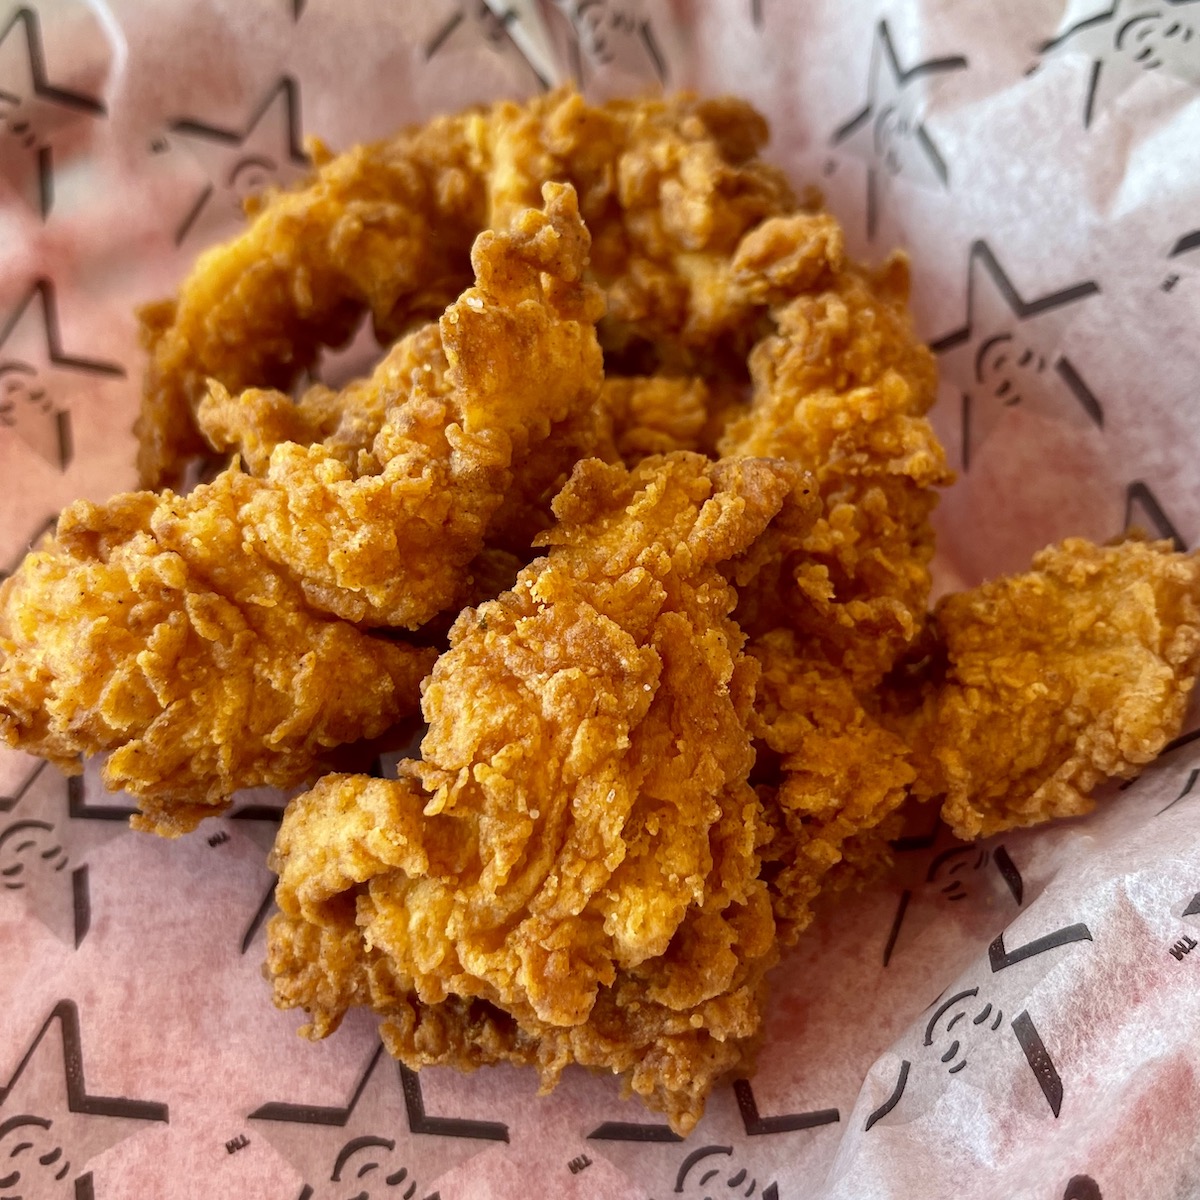 Hand-breaded Chicken Tenders from Carl's Jr. in Doral, Florida